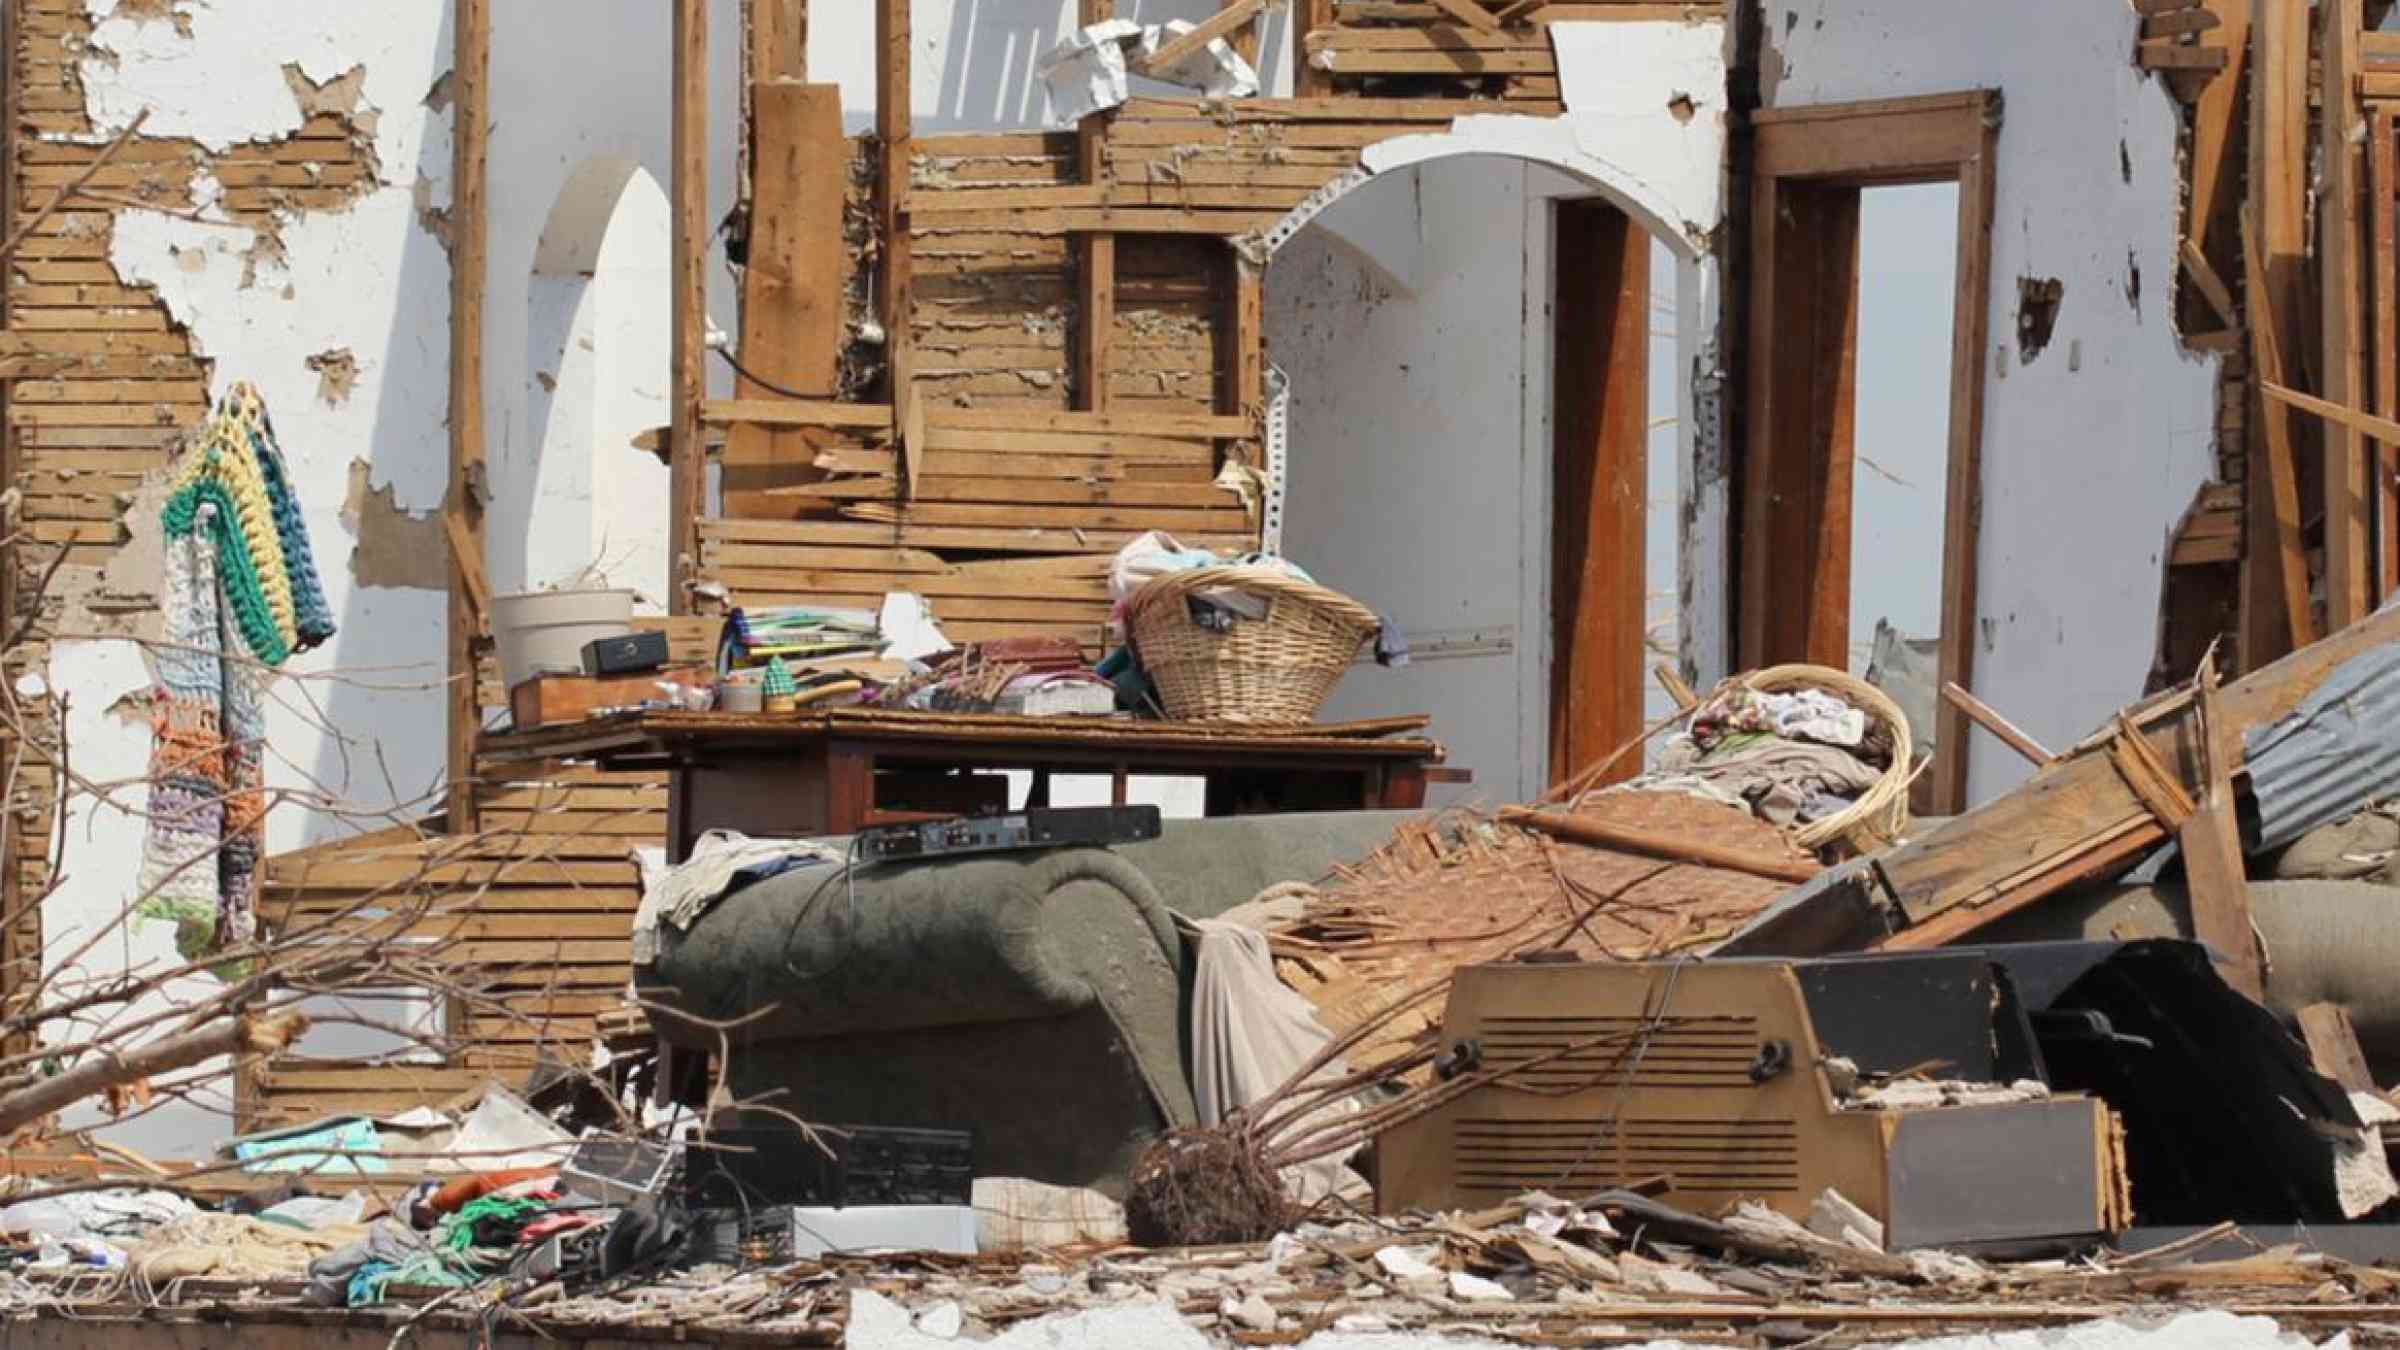 Damages caused by 2011 tornados in the US. Dustie/Shutterstock